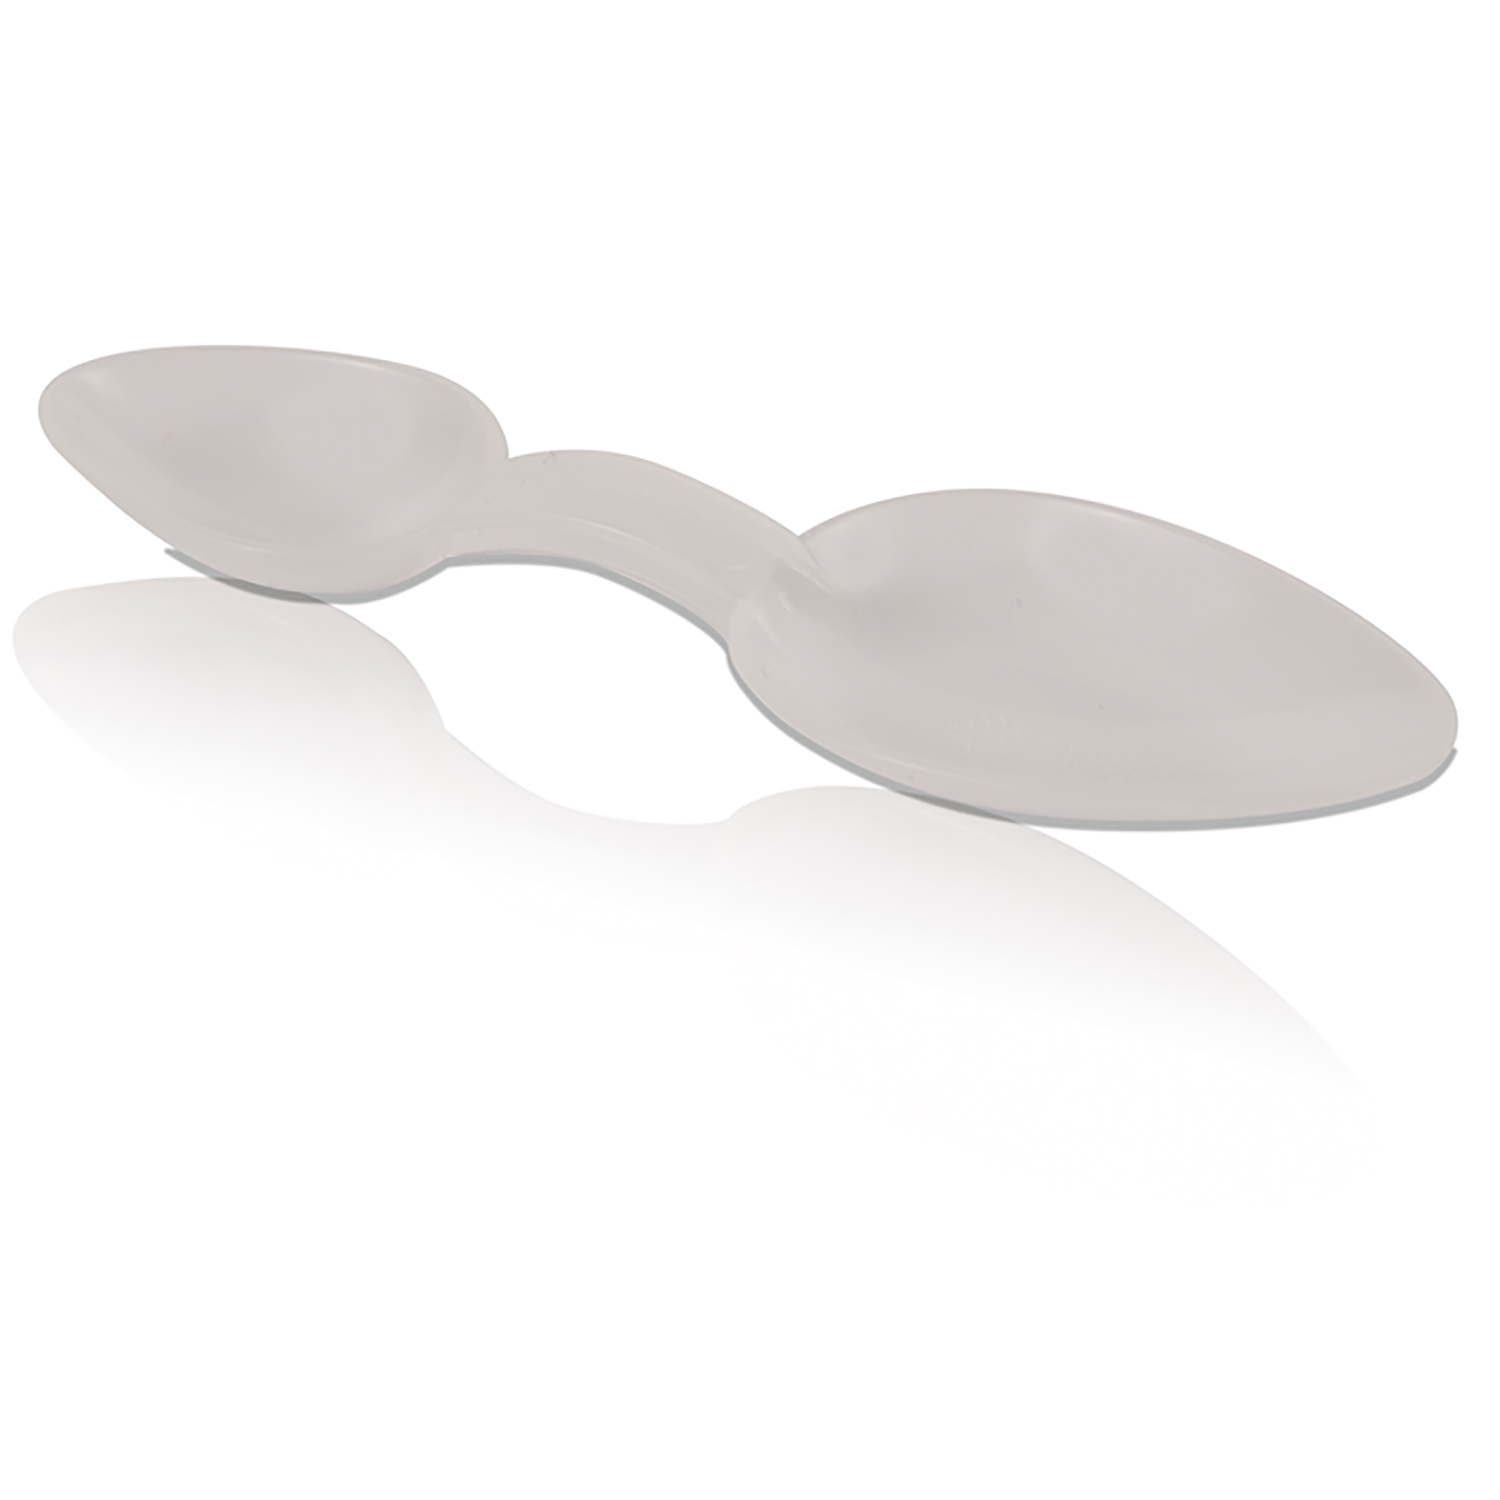 Alvita Double-Ended Medicine Spoons | 2.5 & 5ml | Pack of 250